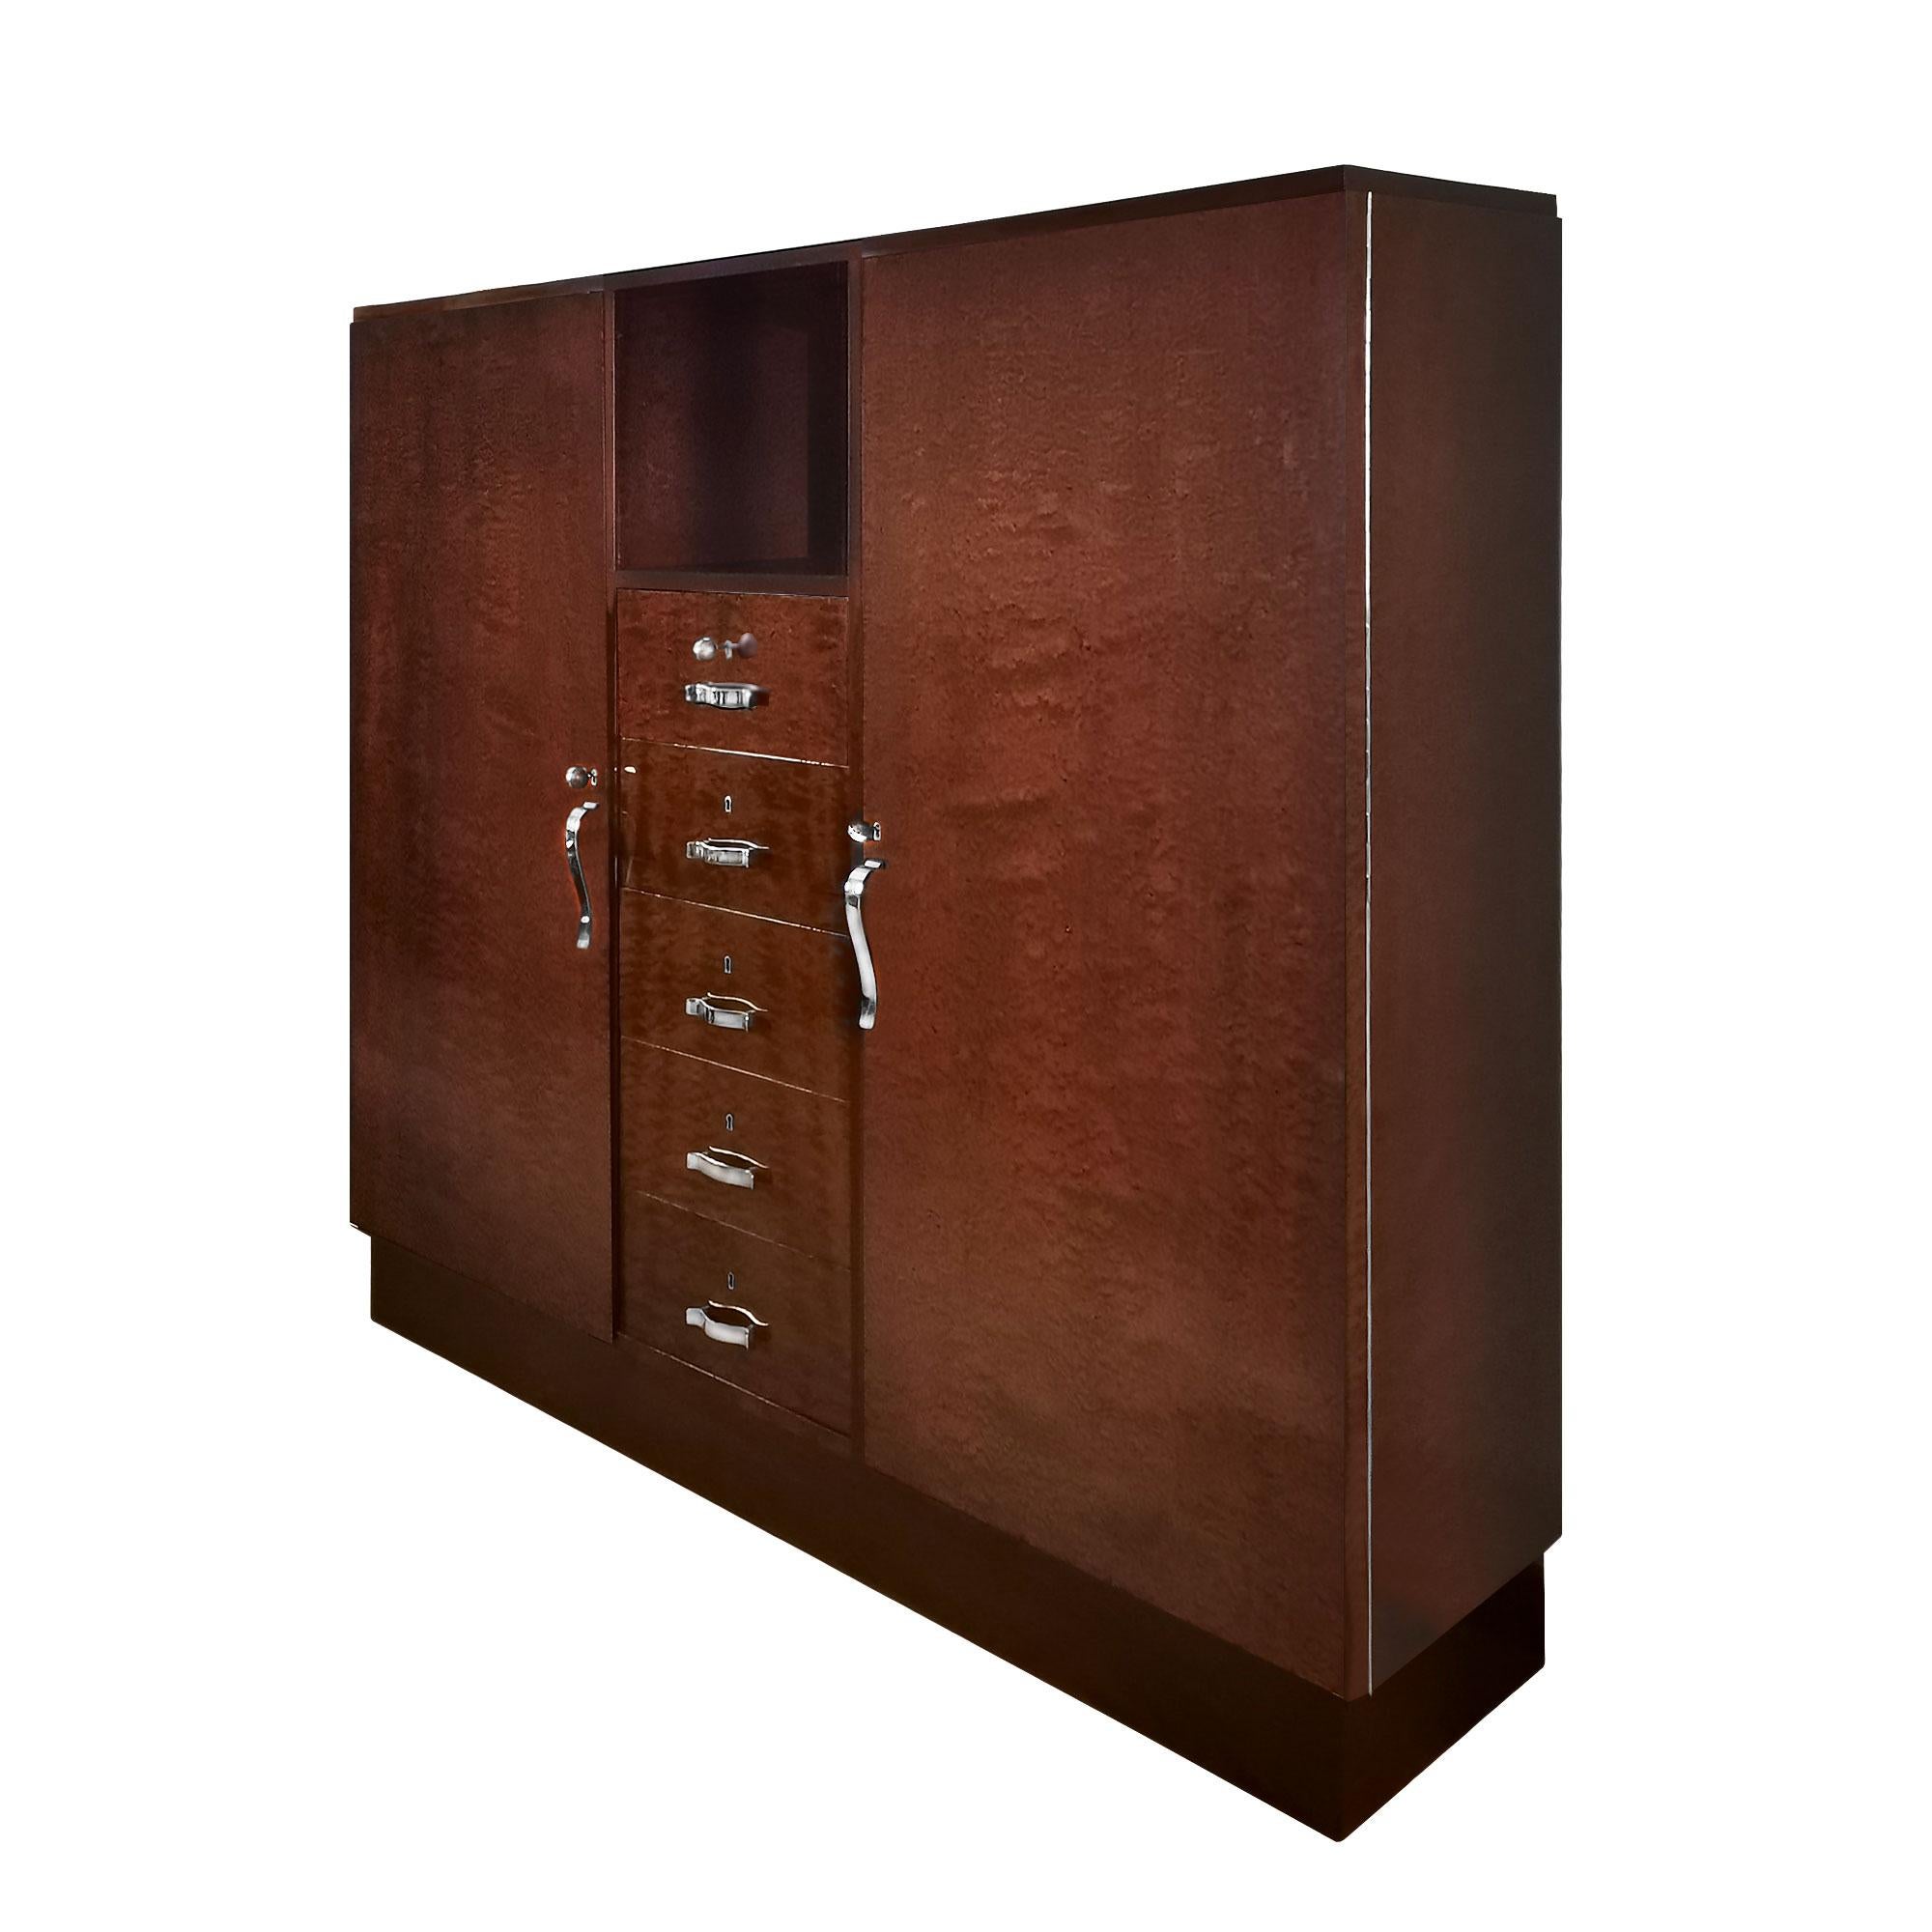 Art Deco bookcase, beech and blond mahogany structure with mottled mahogany veneer. Central block with five drawers with doors on each side with five shelves each, french polish. Nickel plated brass hardware. Can be completely dismantled.

Spain,